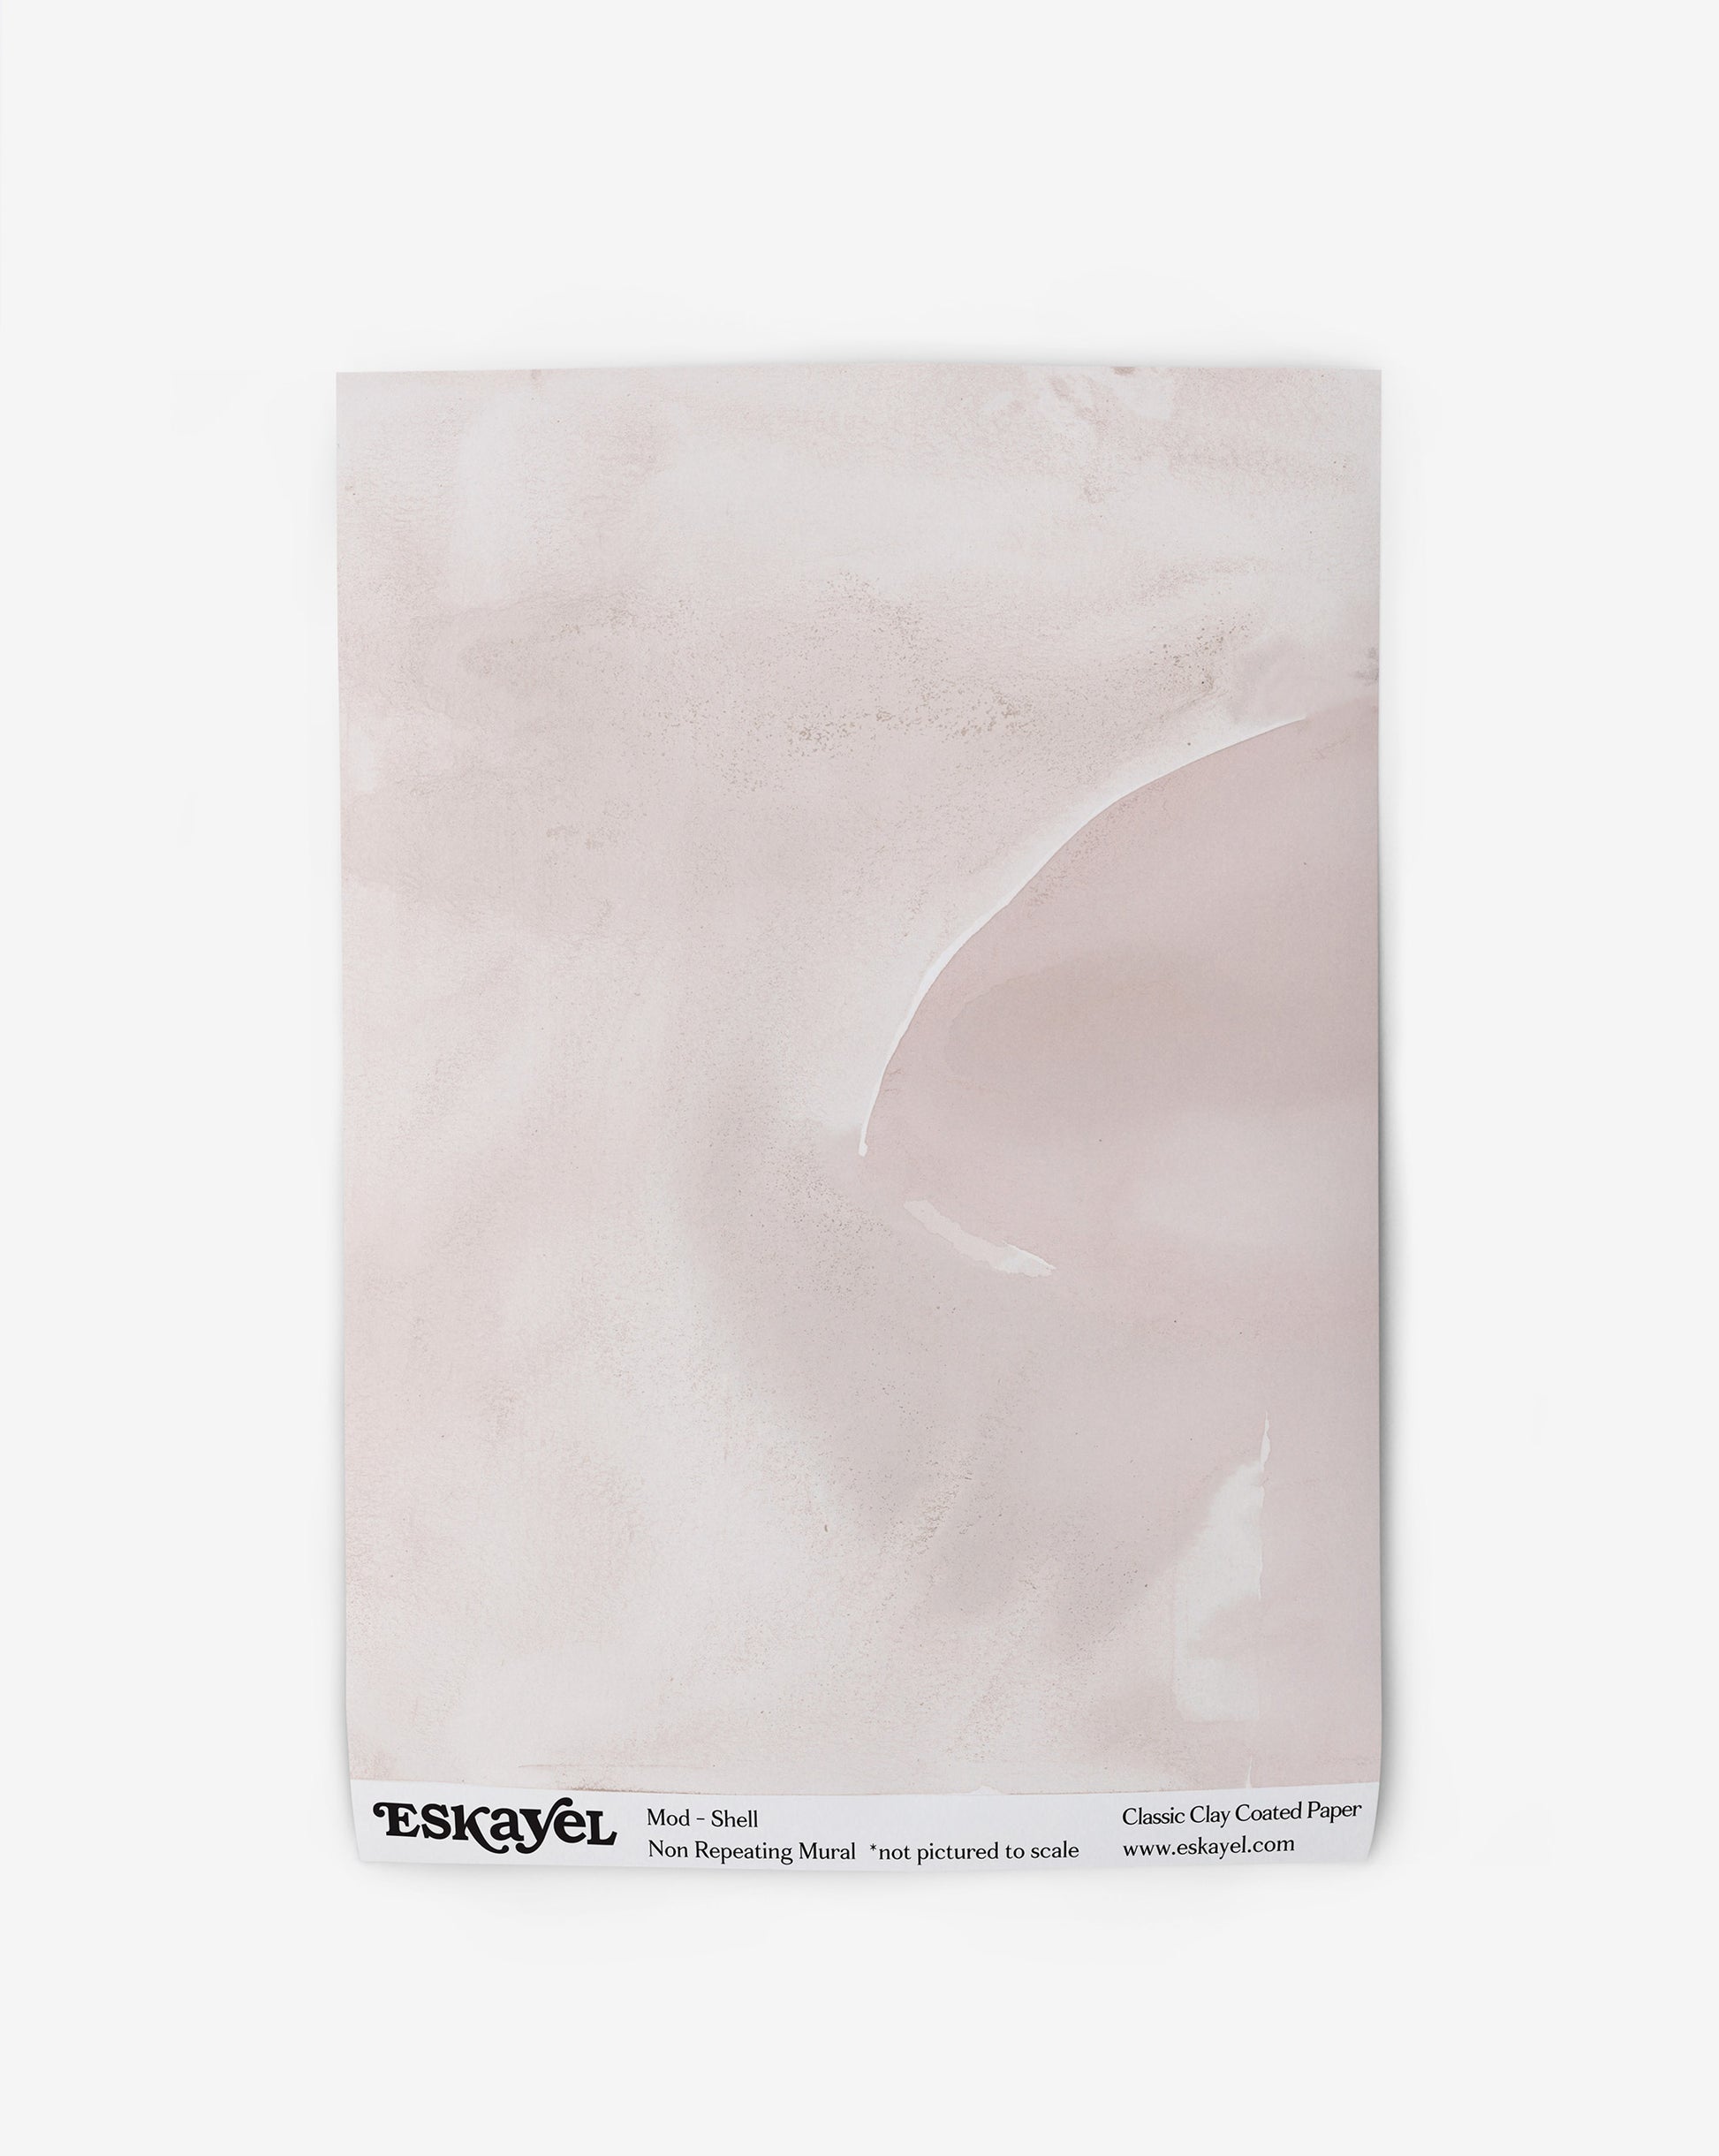 A piece of Mod Mural Wallpaper||Shell with a pink background featuring subtle shapes and an abstract design.